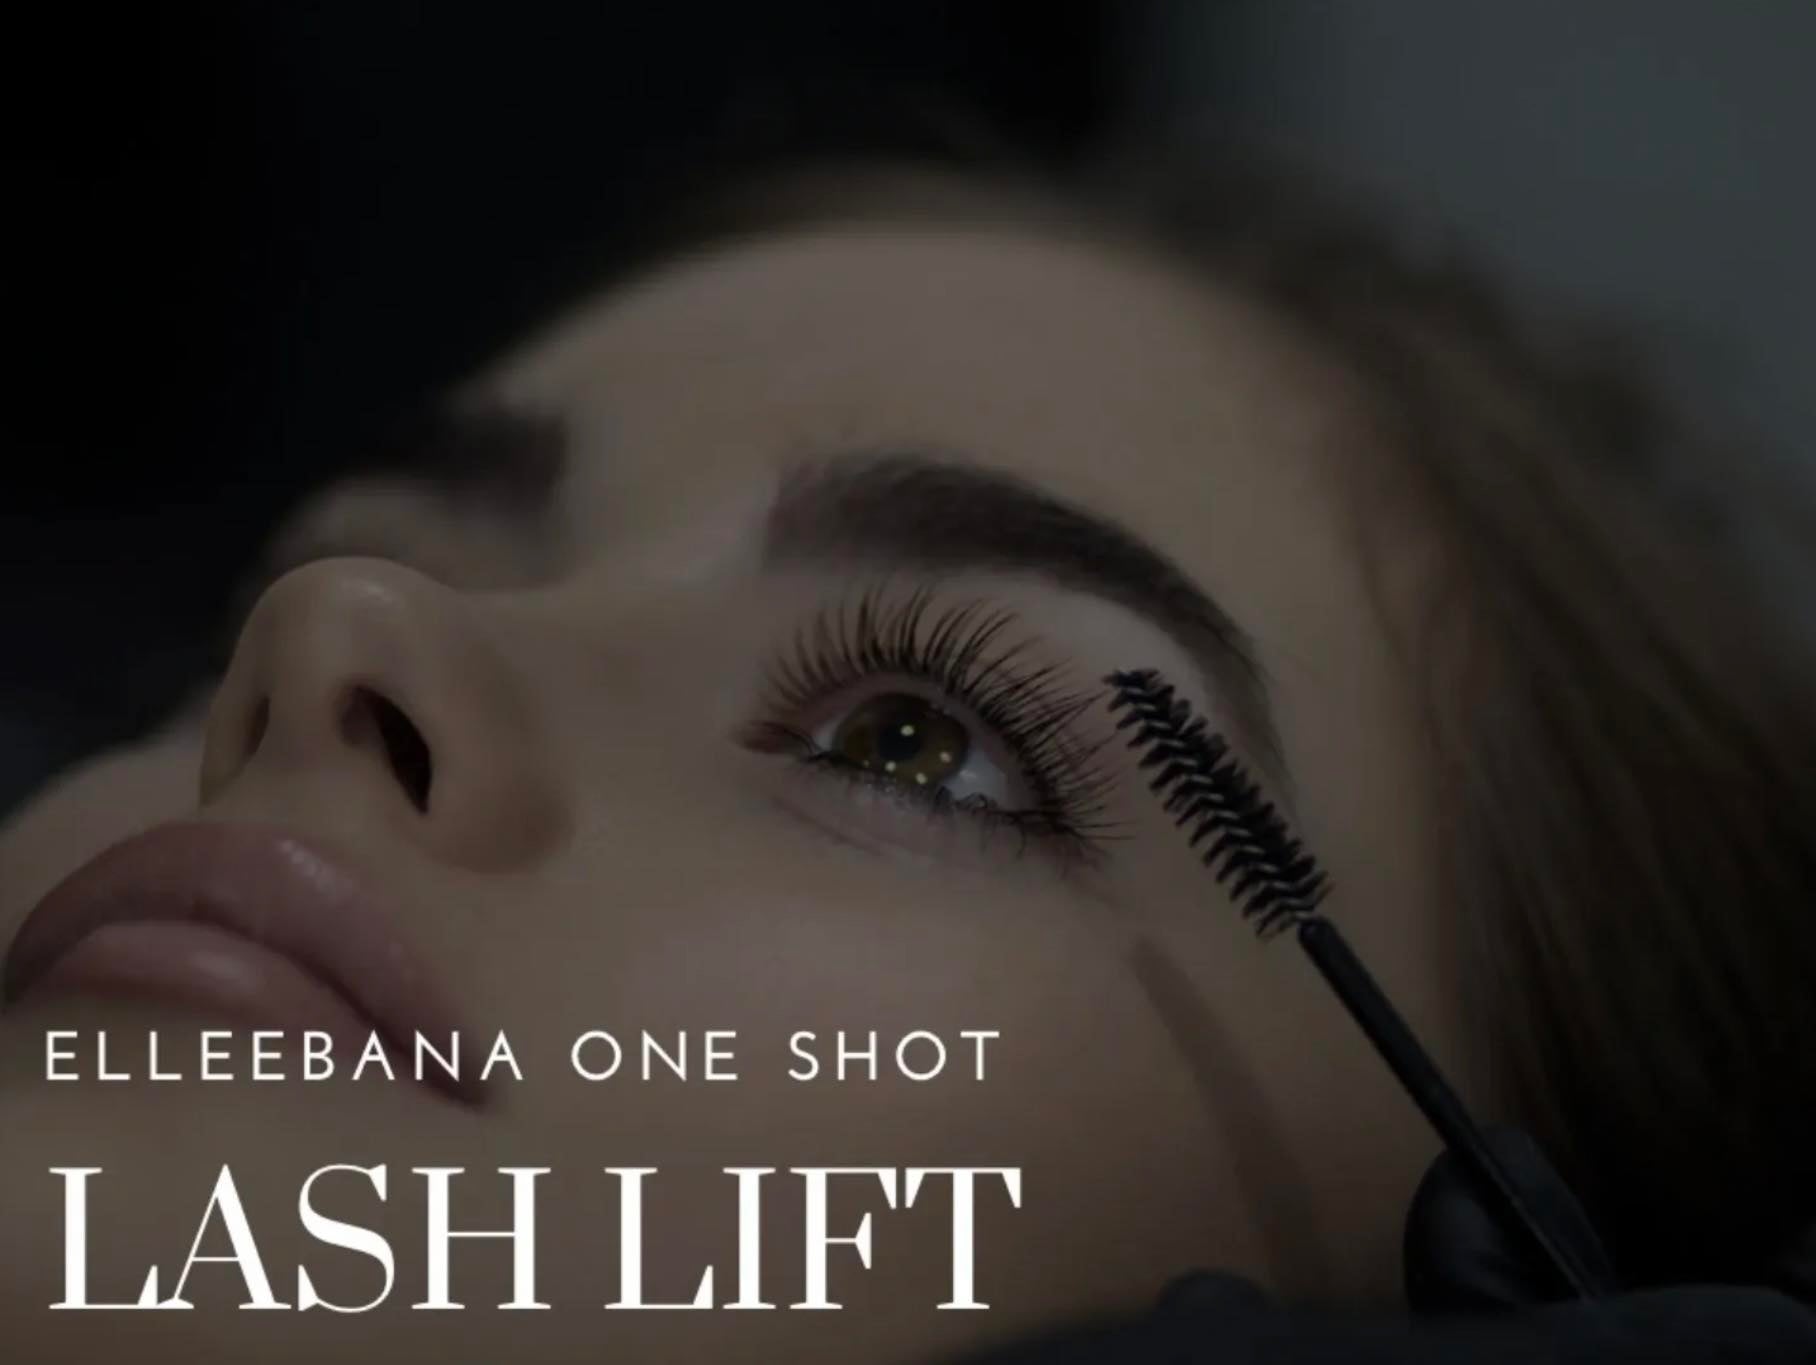 Elleebana One Shot Lash Lift In Person Training with continuing education CE/ CEU hours. 